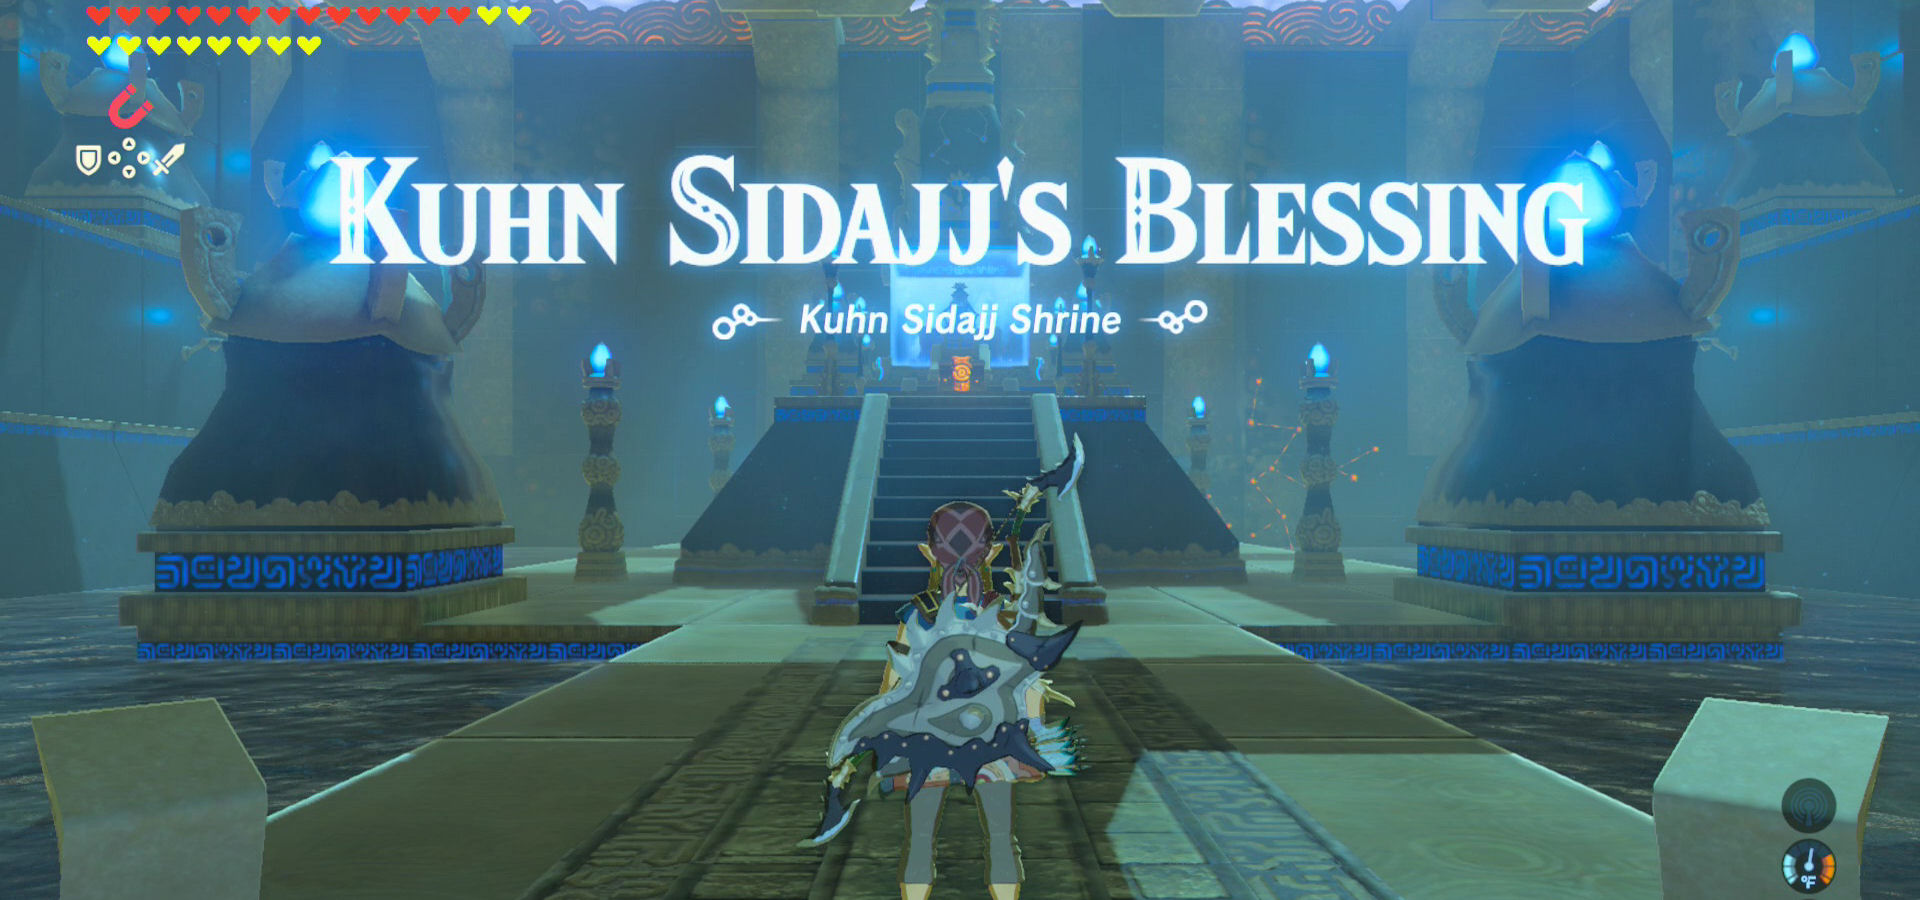 How To Complete The Trial Of Second Sight Shrine Quest In BotW